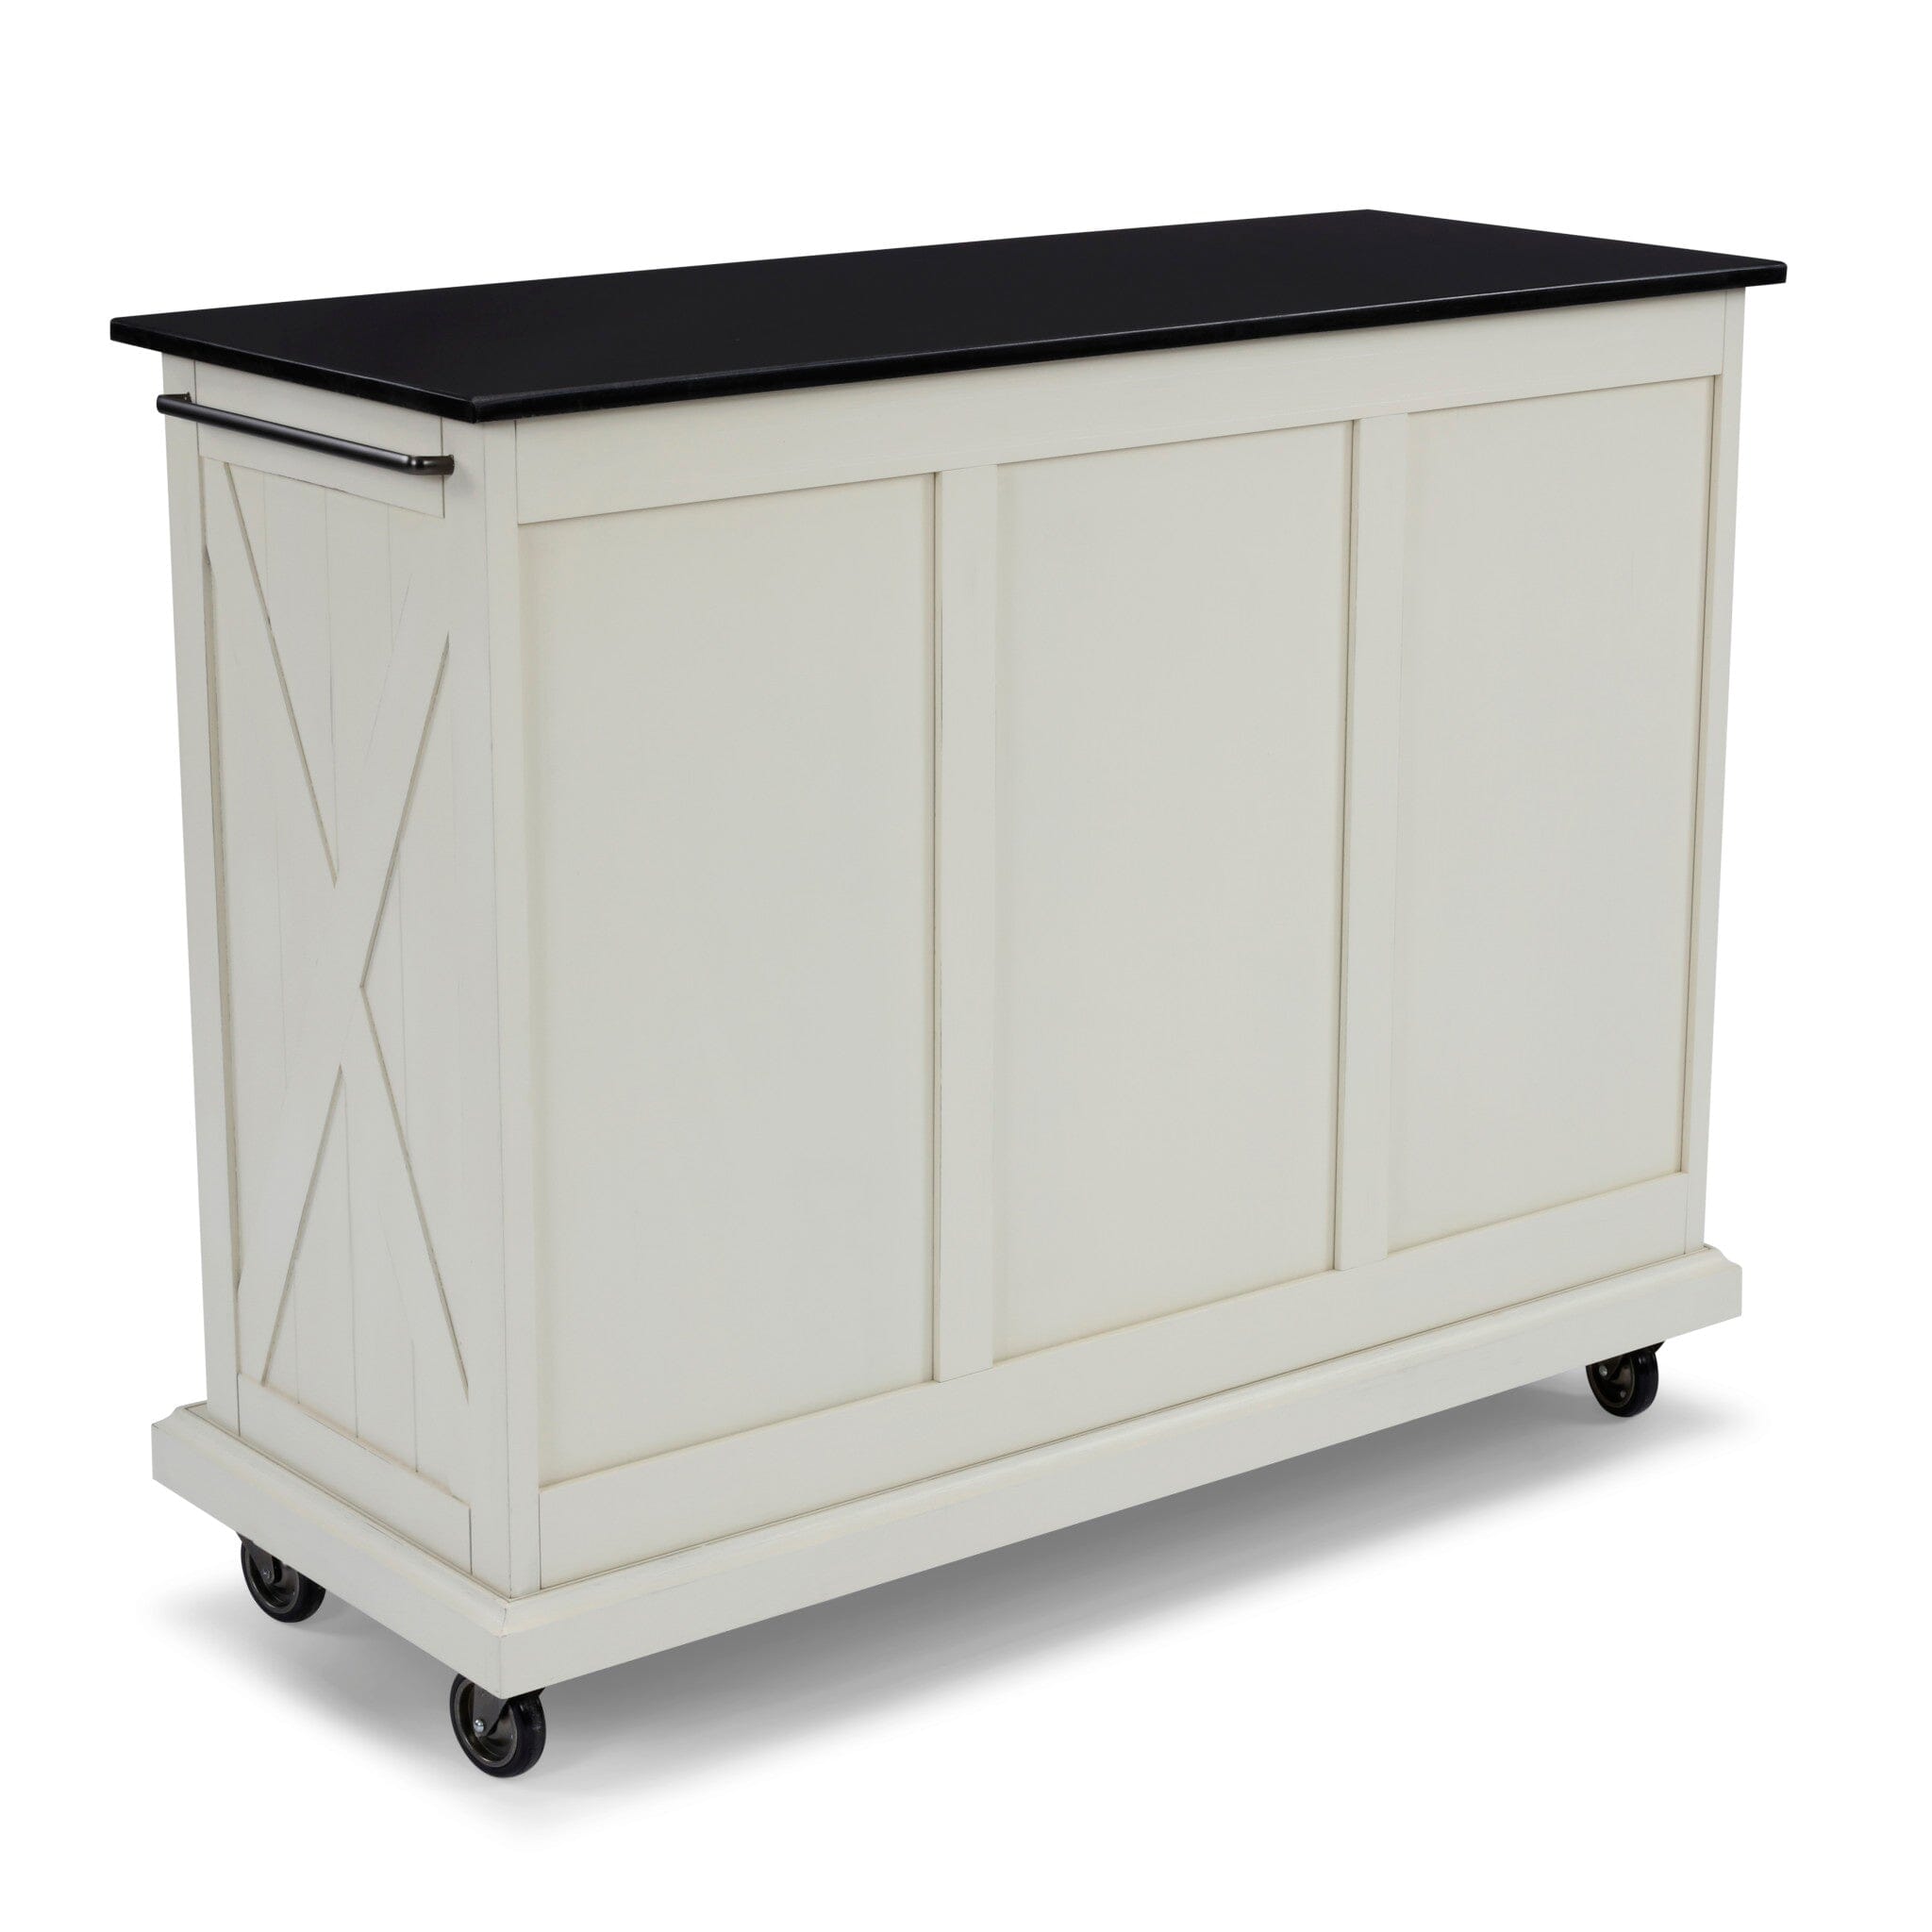 Traditional Kitchen Cart By Seaside Lodge Kitchen Cart Seaside Lodge